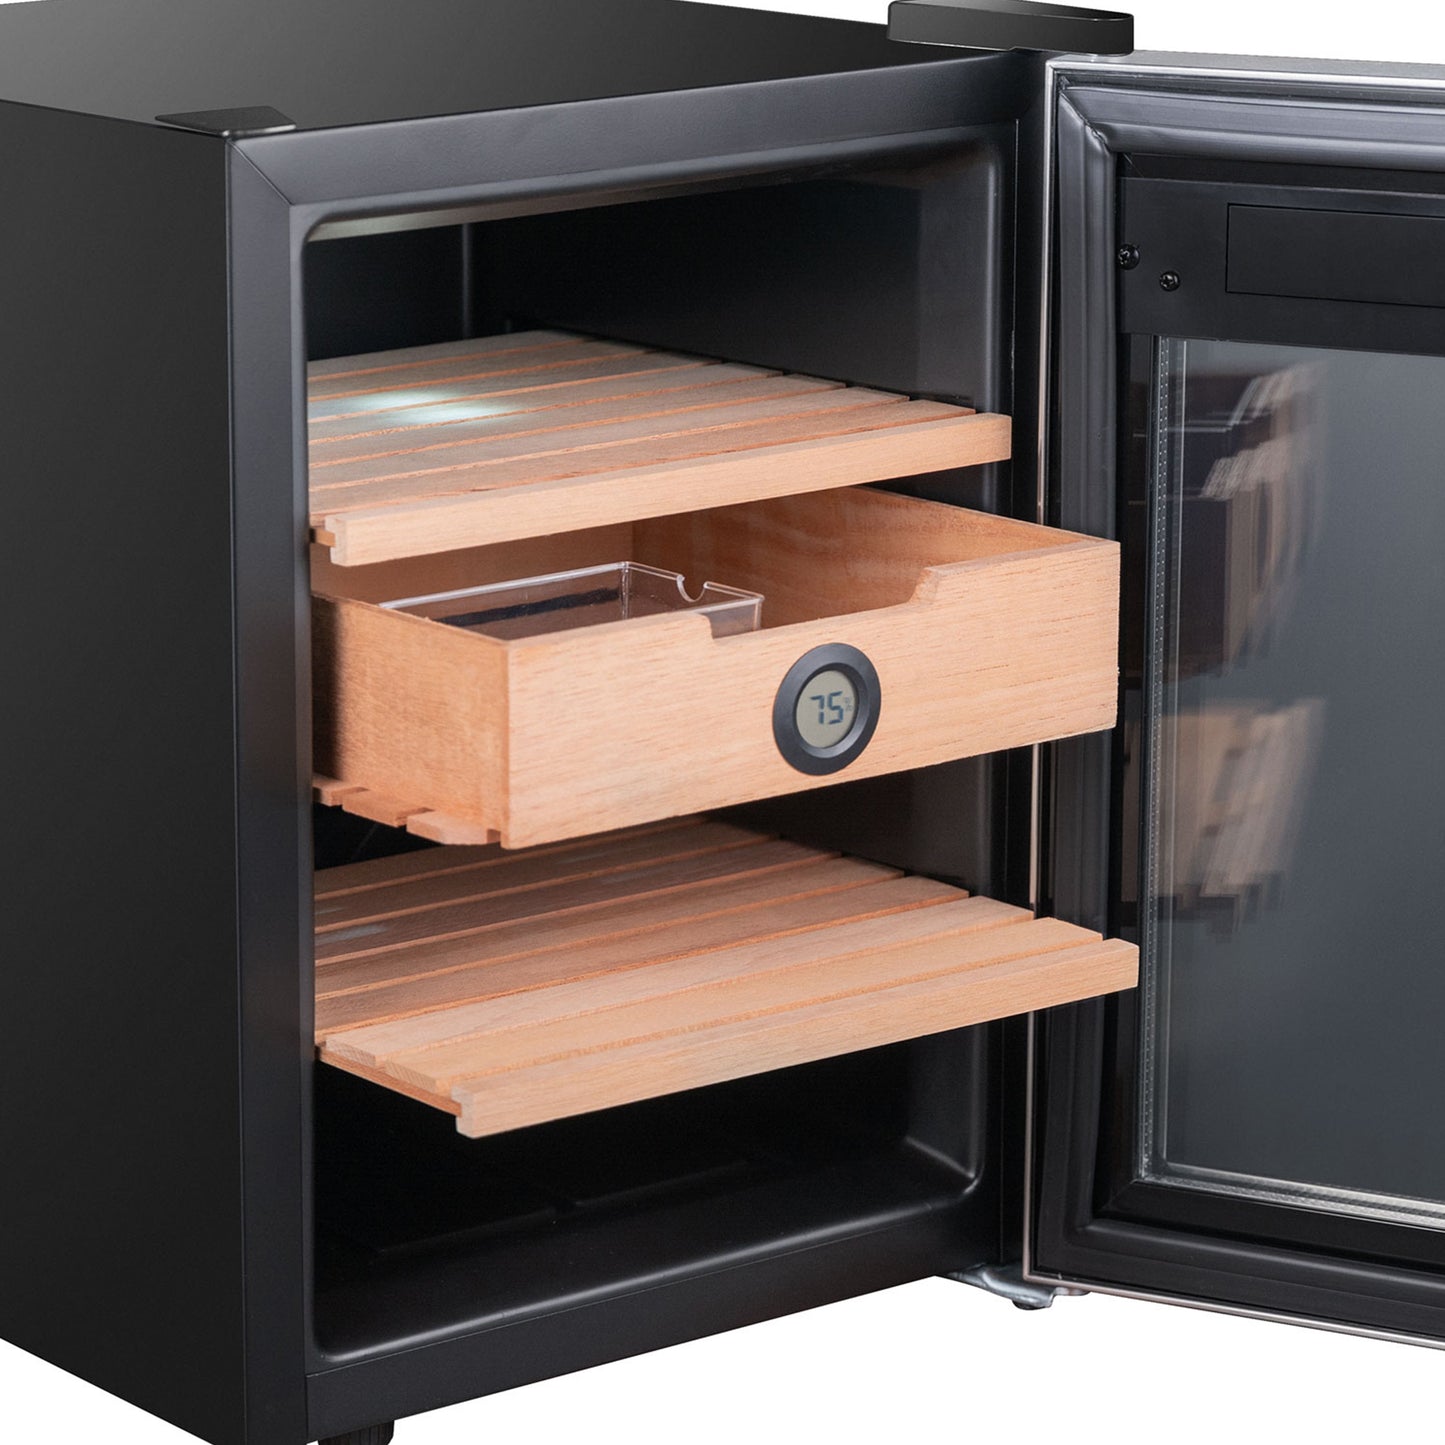 Buy a Whynter 1.2 cu. ft. Stainless Steel Digital Control and Display Cigar Humidor with Spanish Cedar Shelves by Chilled Beverages